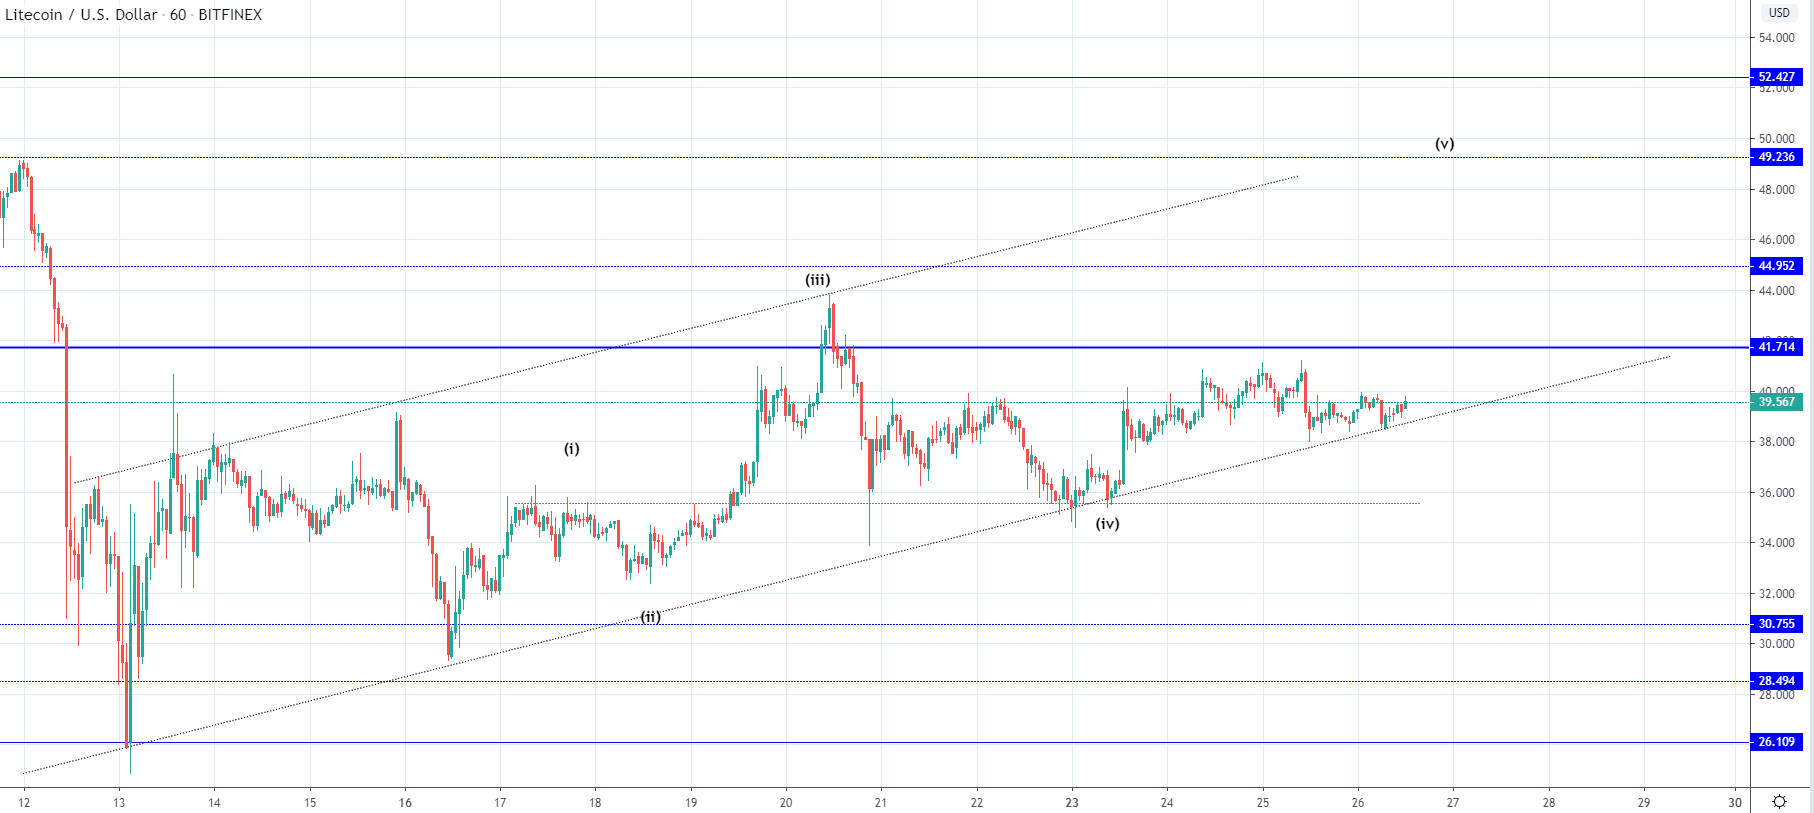 LTC and EOS - Sideways movement seen but another increase expected